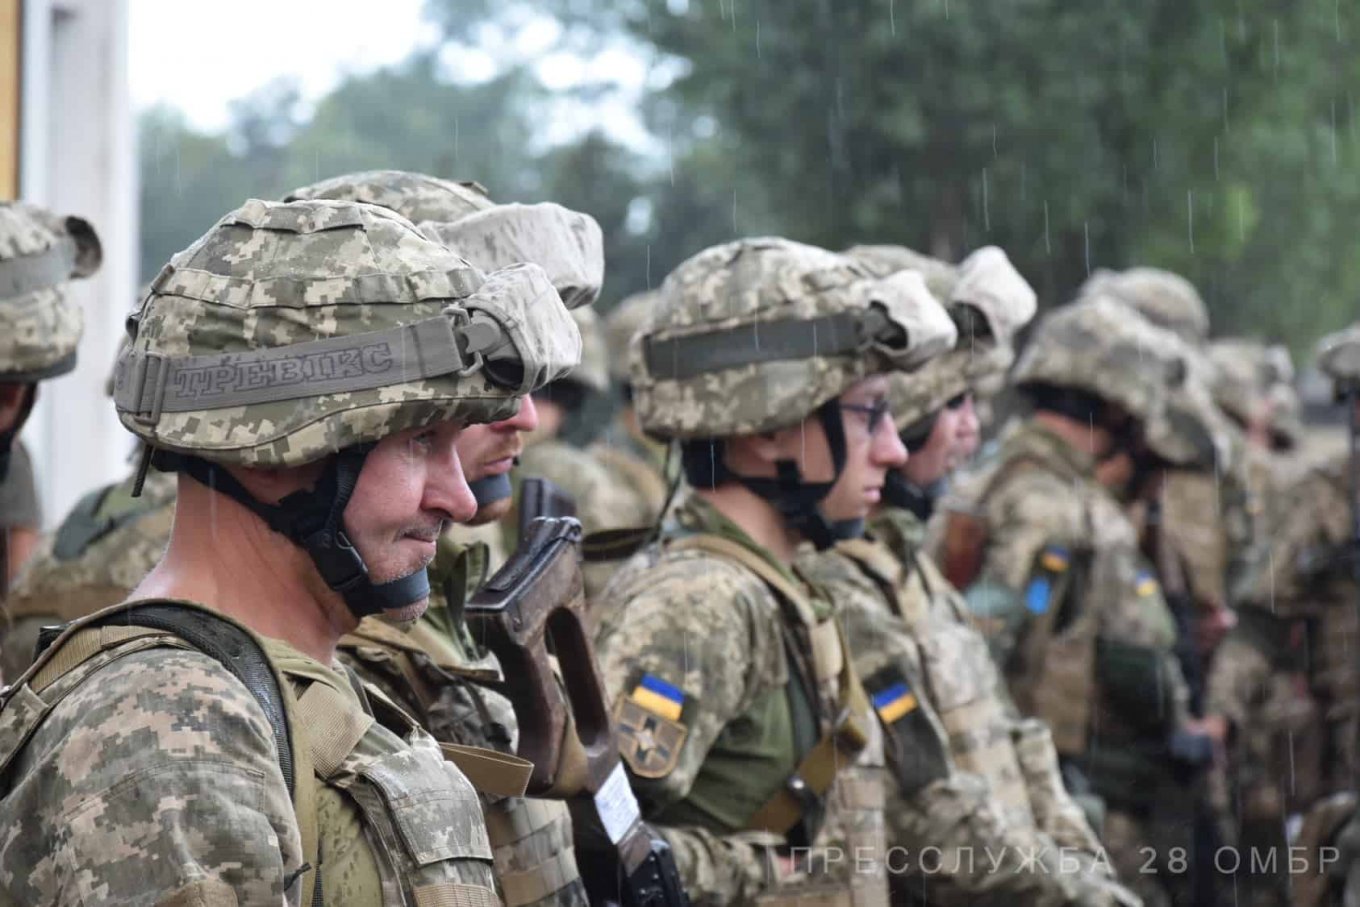 Military of the 28th Brigade. Photo: 28 OMBr